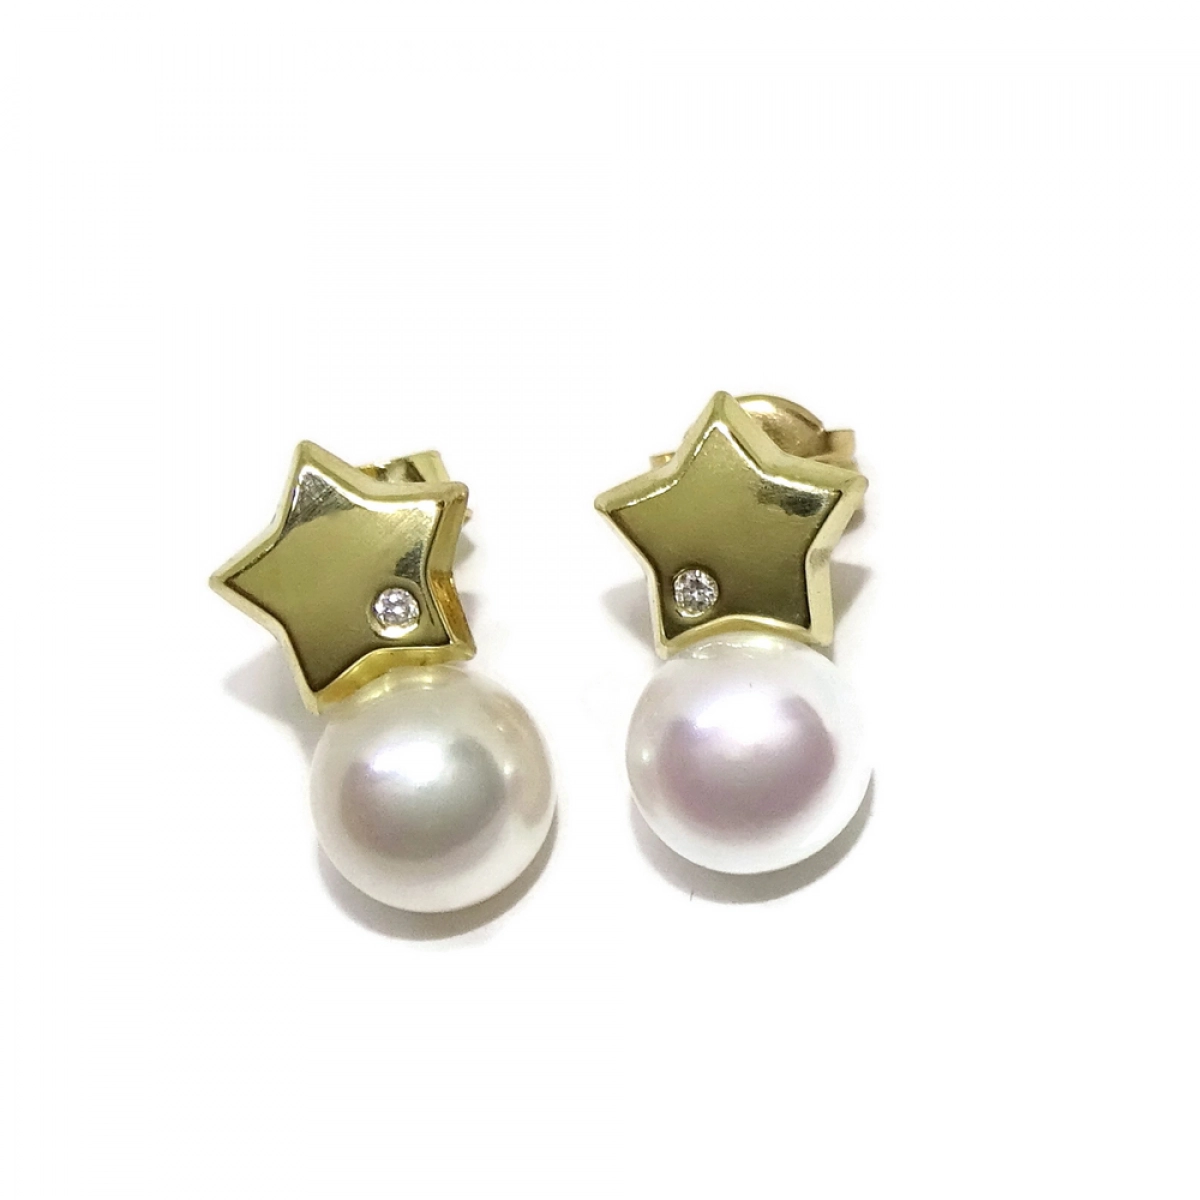 PRECIOUS EARRINGS REMOVABLE WITH DIAMONDS OF 0.04 CTS, AND 2 CULTURED PEARLS NEVER SAY NEVER